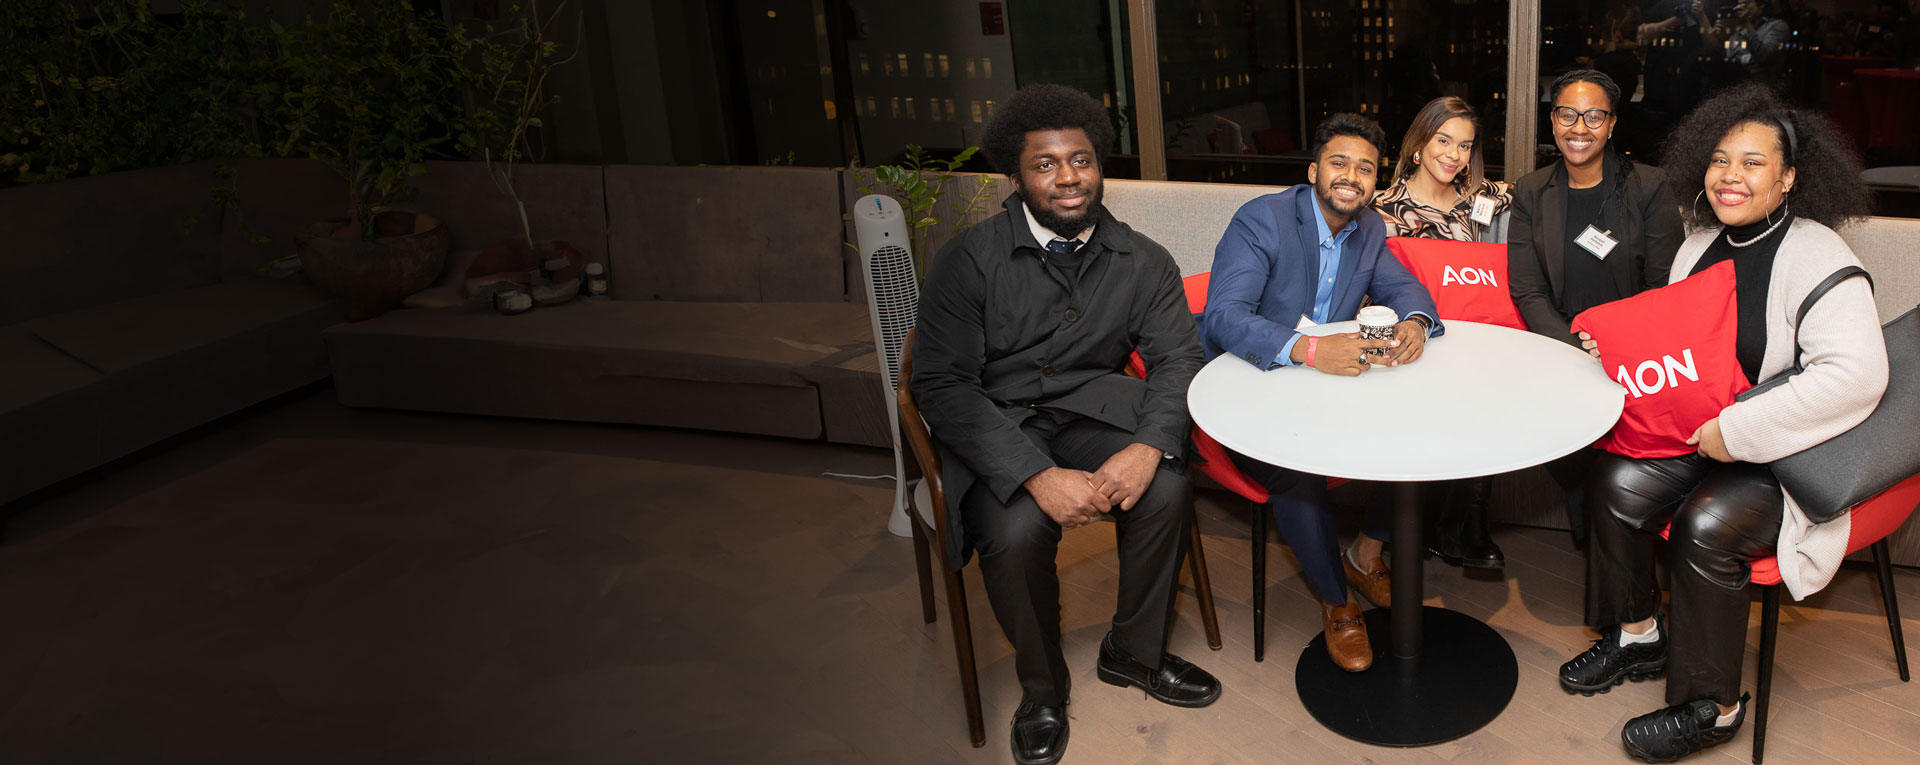 Students gathered at the New York City headquarters of Aon plc for a reception